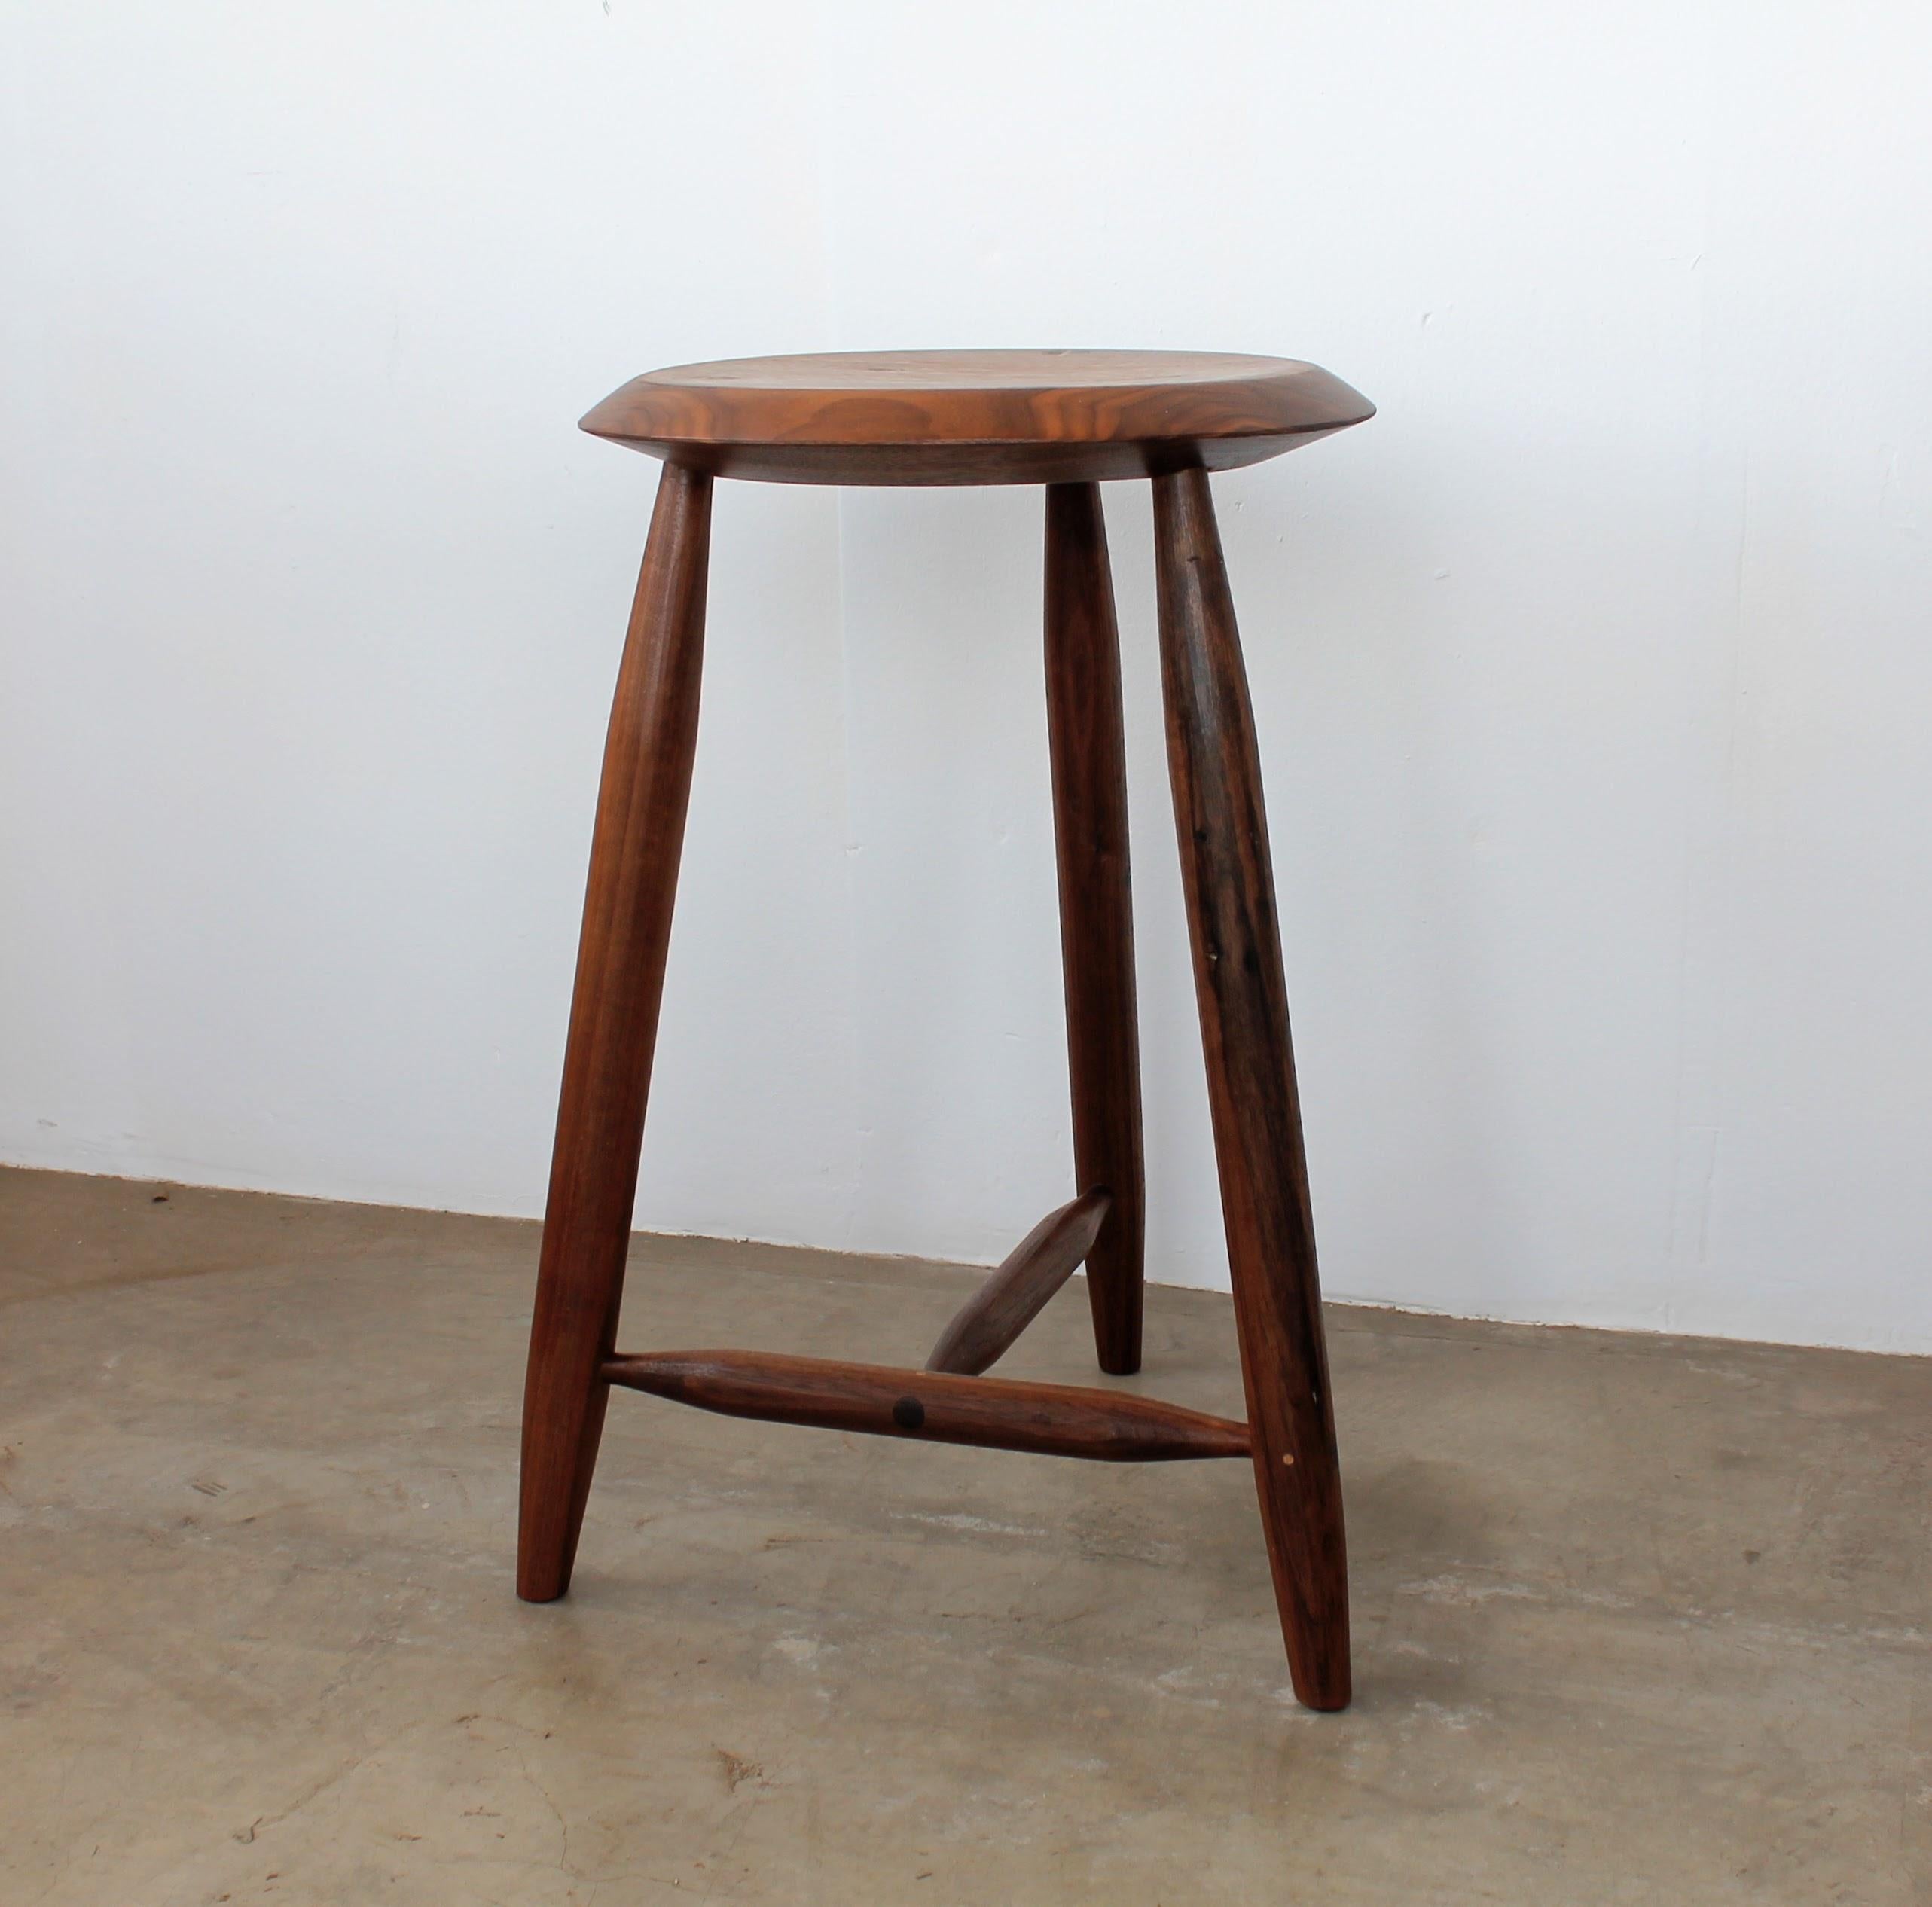 Light and strong, the Beachcomber Counter Stool evokes the sight of an old wooden single hull; it's lean, sturdy mast together with the rigging worthy of the high seas. Constructed of hand shaped legs and stretchers, each piece is carefully fit and